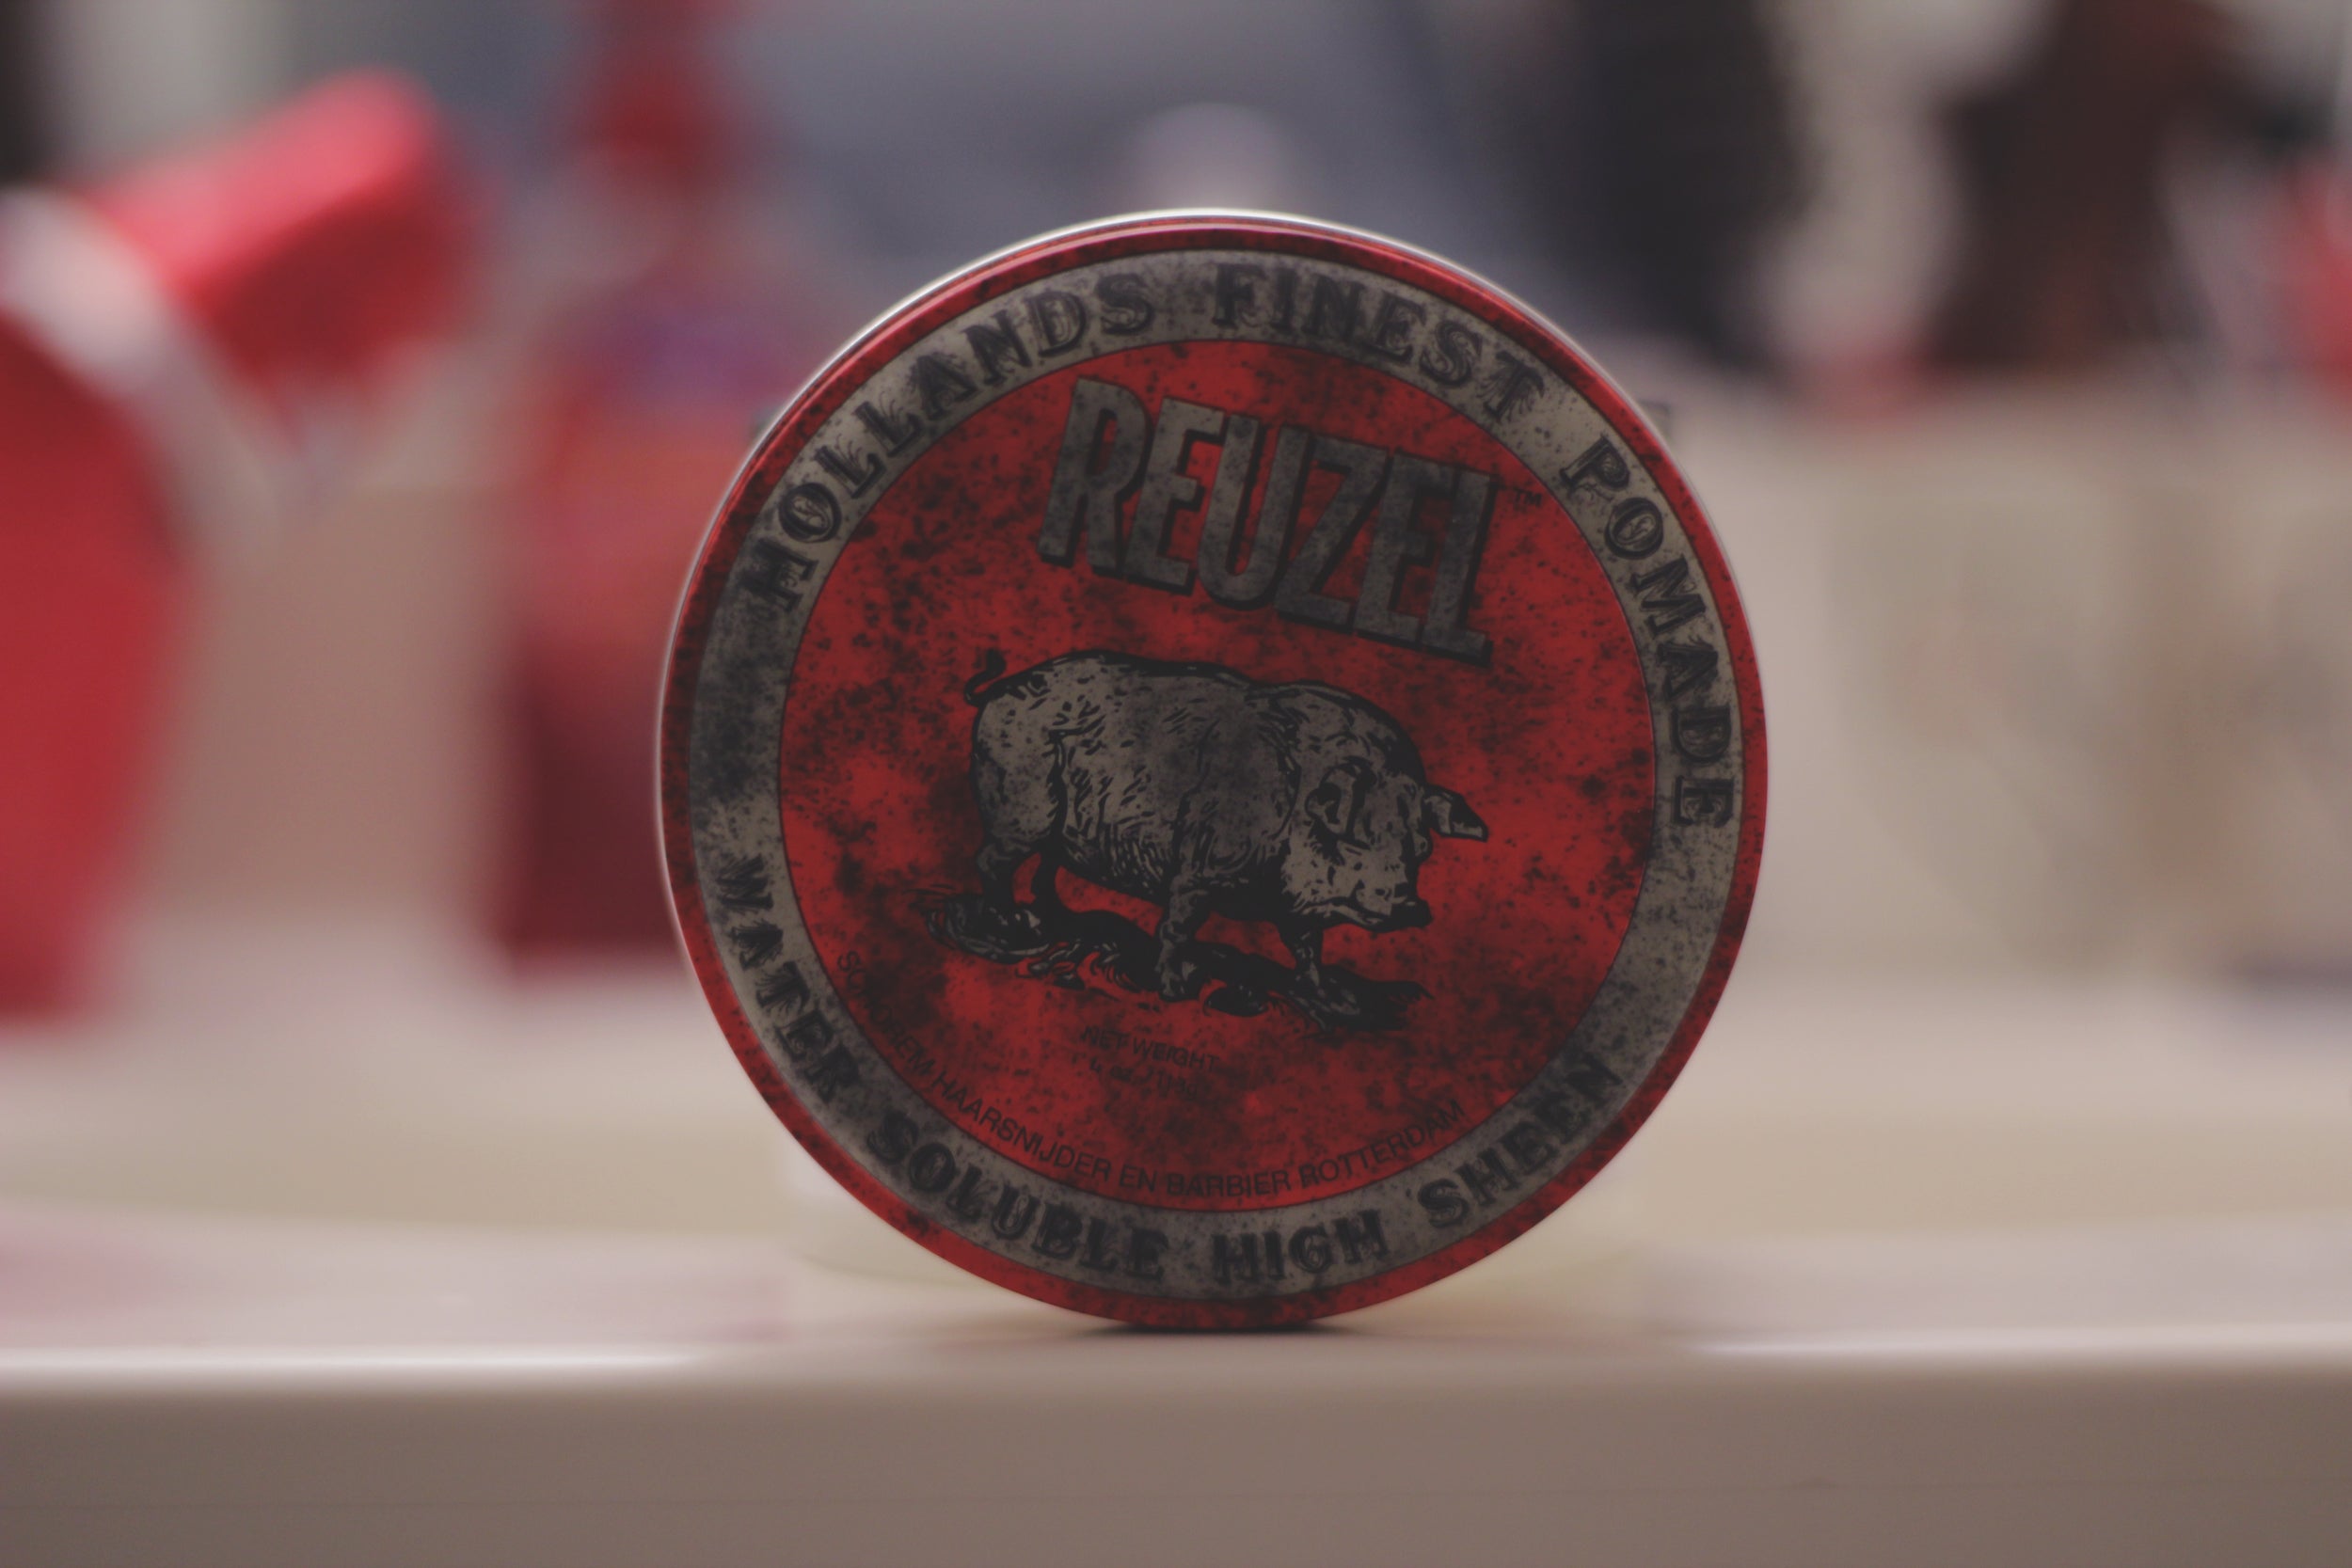 Reuzel Red Pomade Water Soluble High Sheen 35g